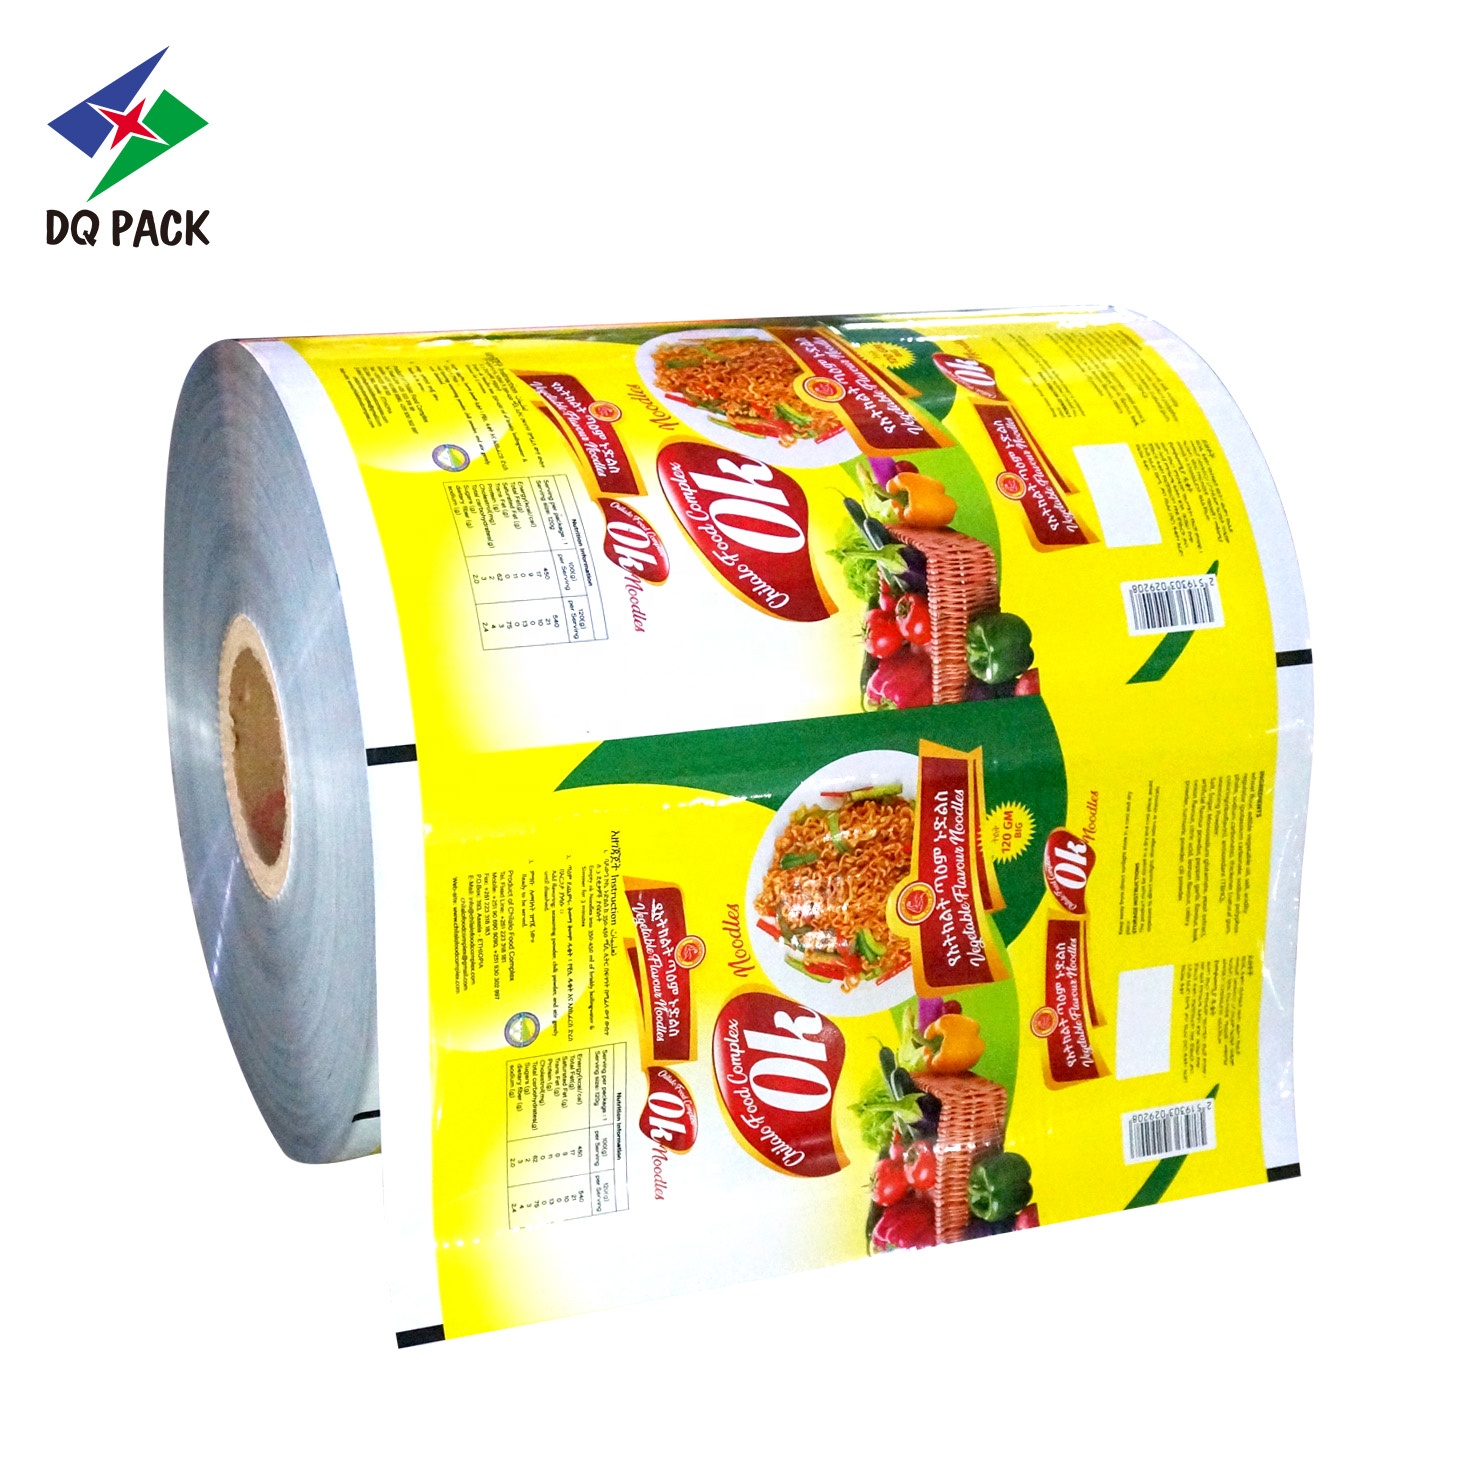 DQ PACK China Supplier Snack Biscuit Potato Chips Packaging Roll Film Aluminum Foil Food Roll Stock Film